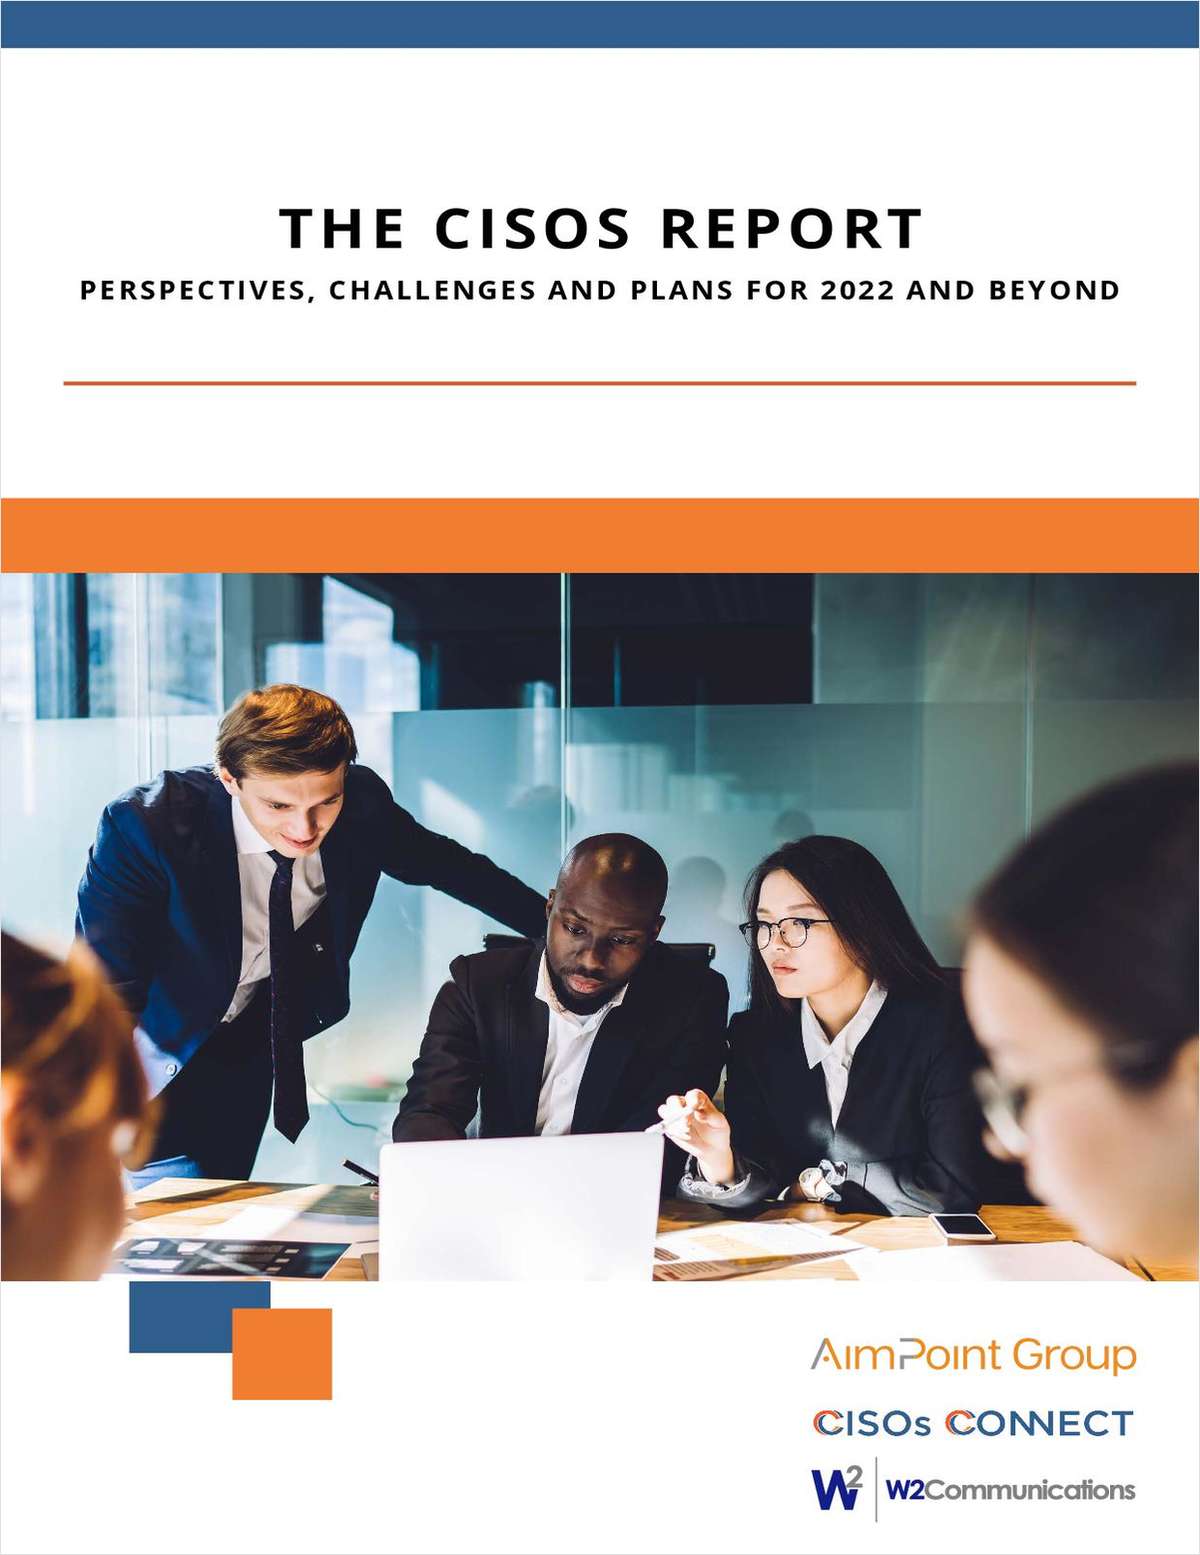 The CISOs Report: Perspectives, Challenges and Plans for 2022 and Beyond